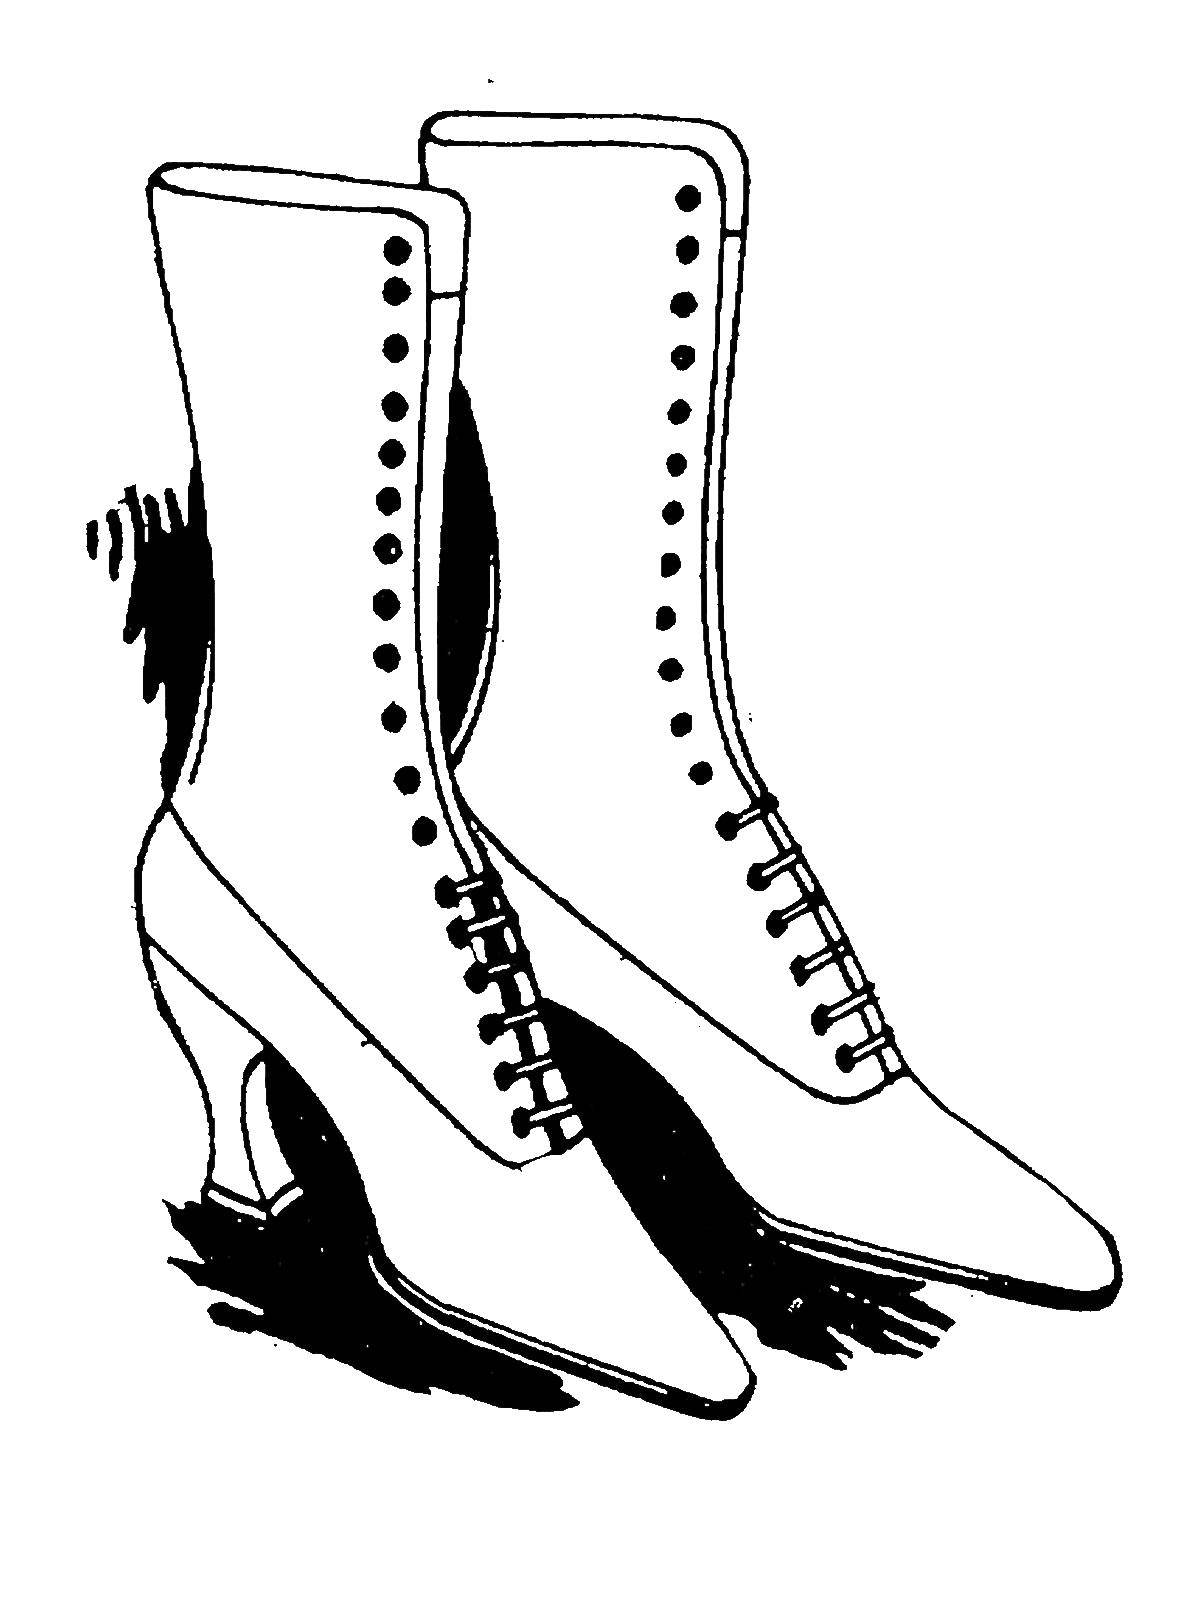 Coloring Fashion boots. Category clothing. Tags:  Clothing, shoes, boots.